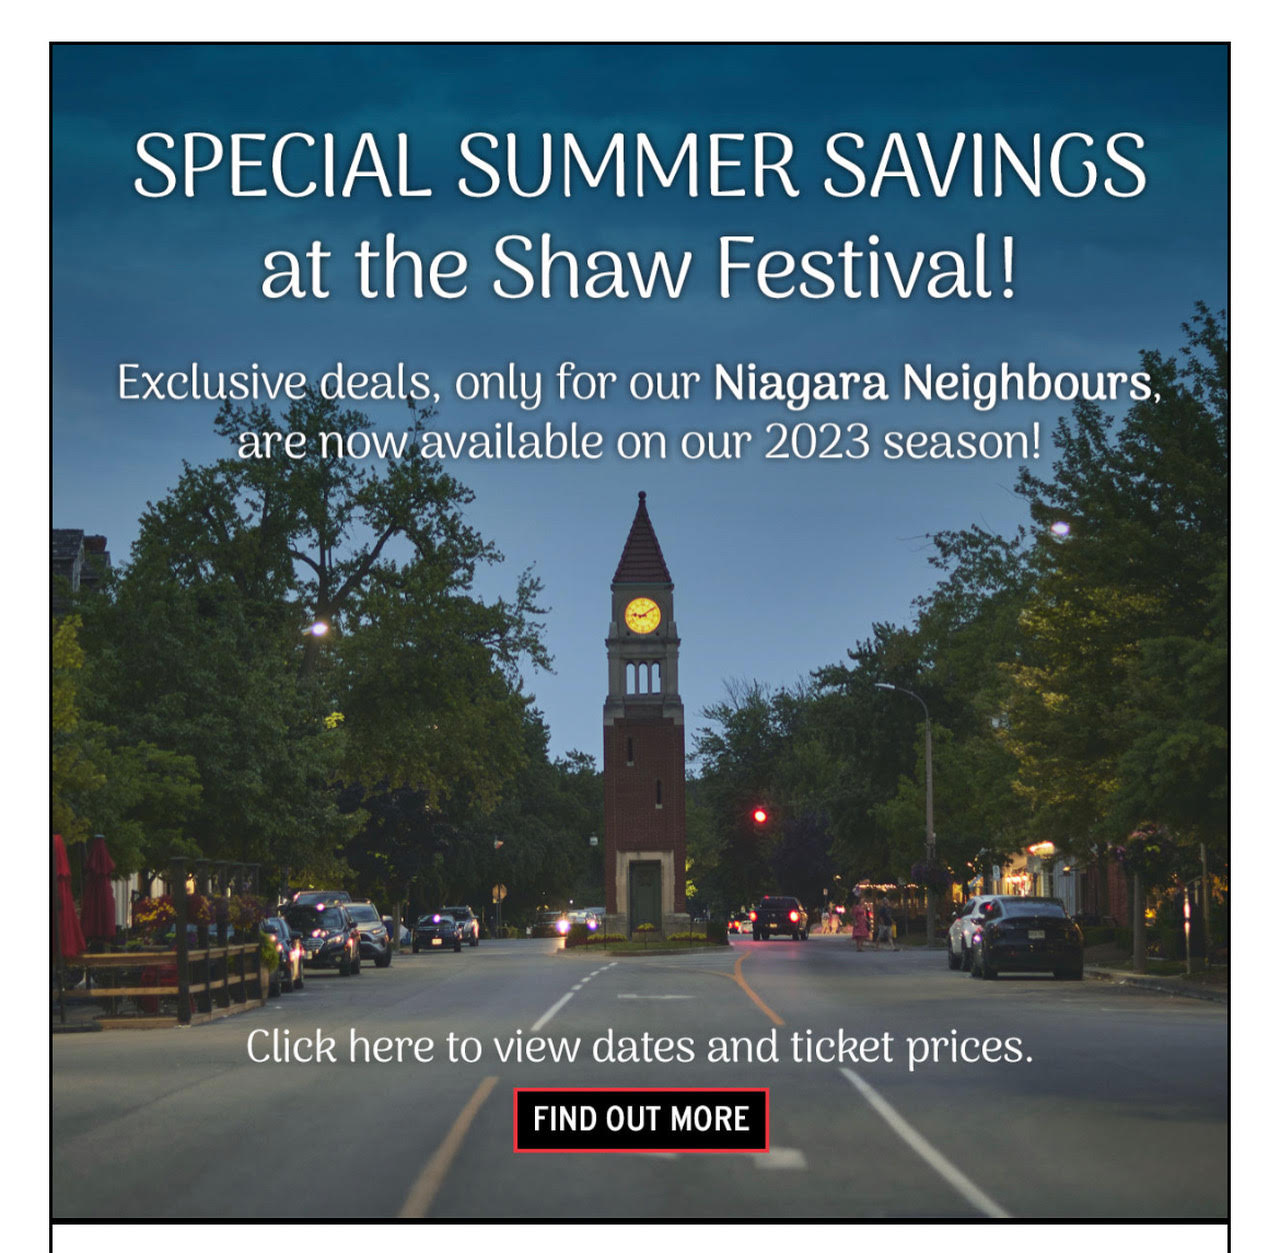 Special ticket prices for our Niagara Neighbours